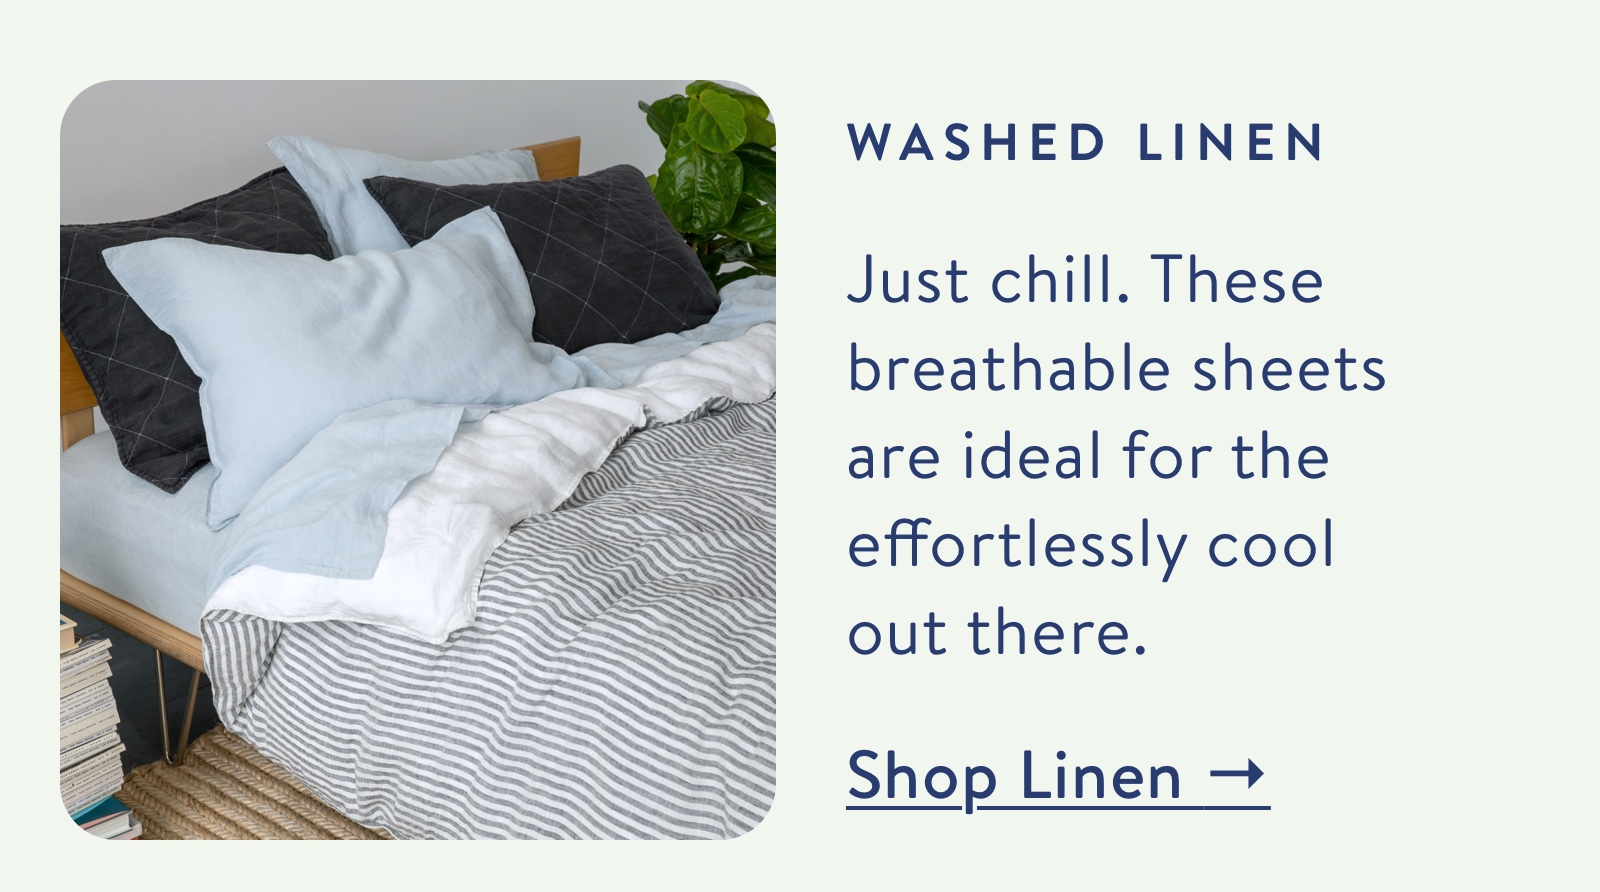 Washed Linen